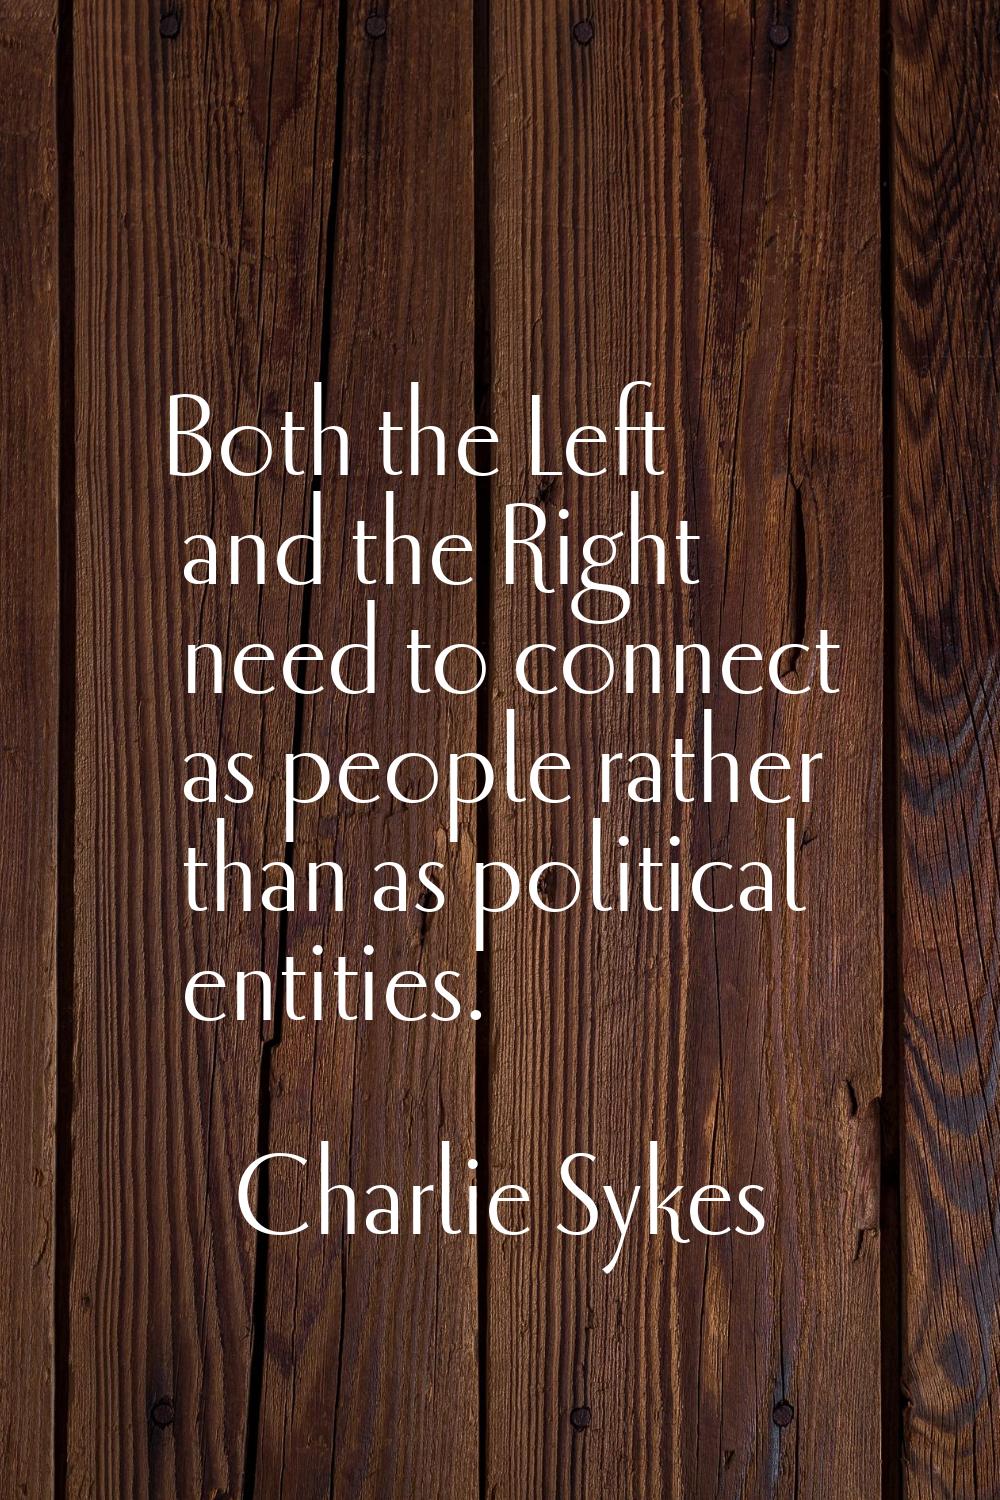 Both the Left and the Right need to connect as people rather than as political entities.